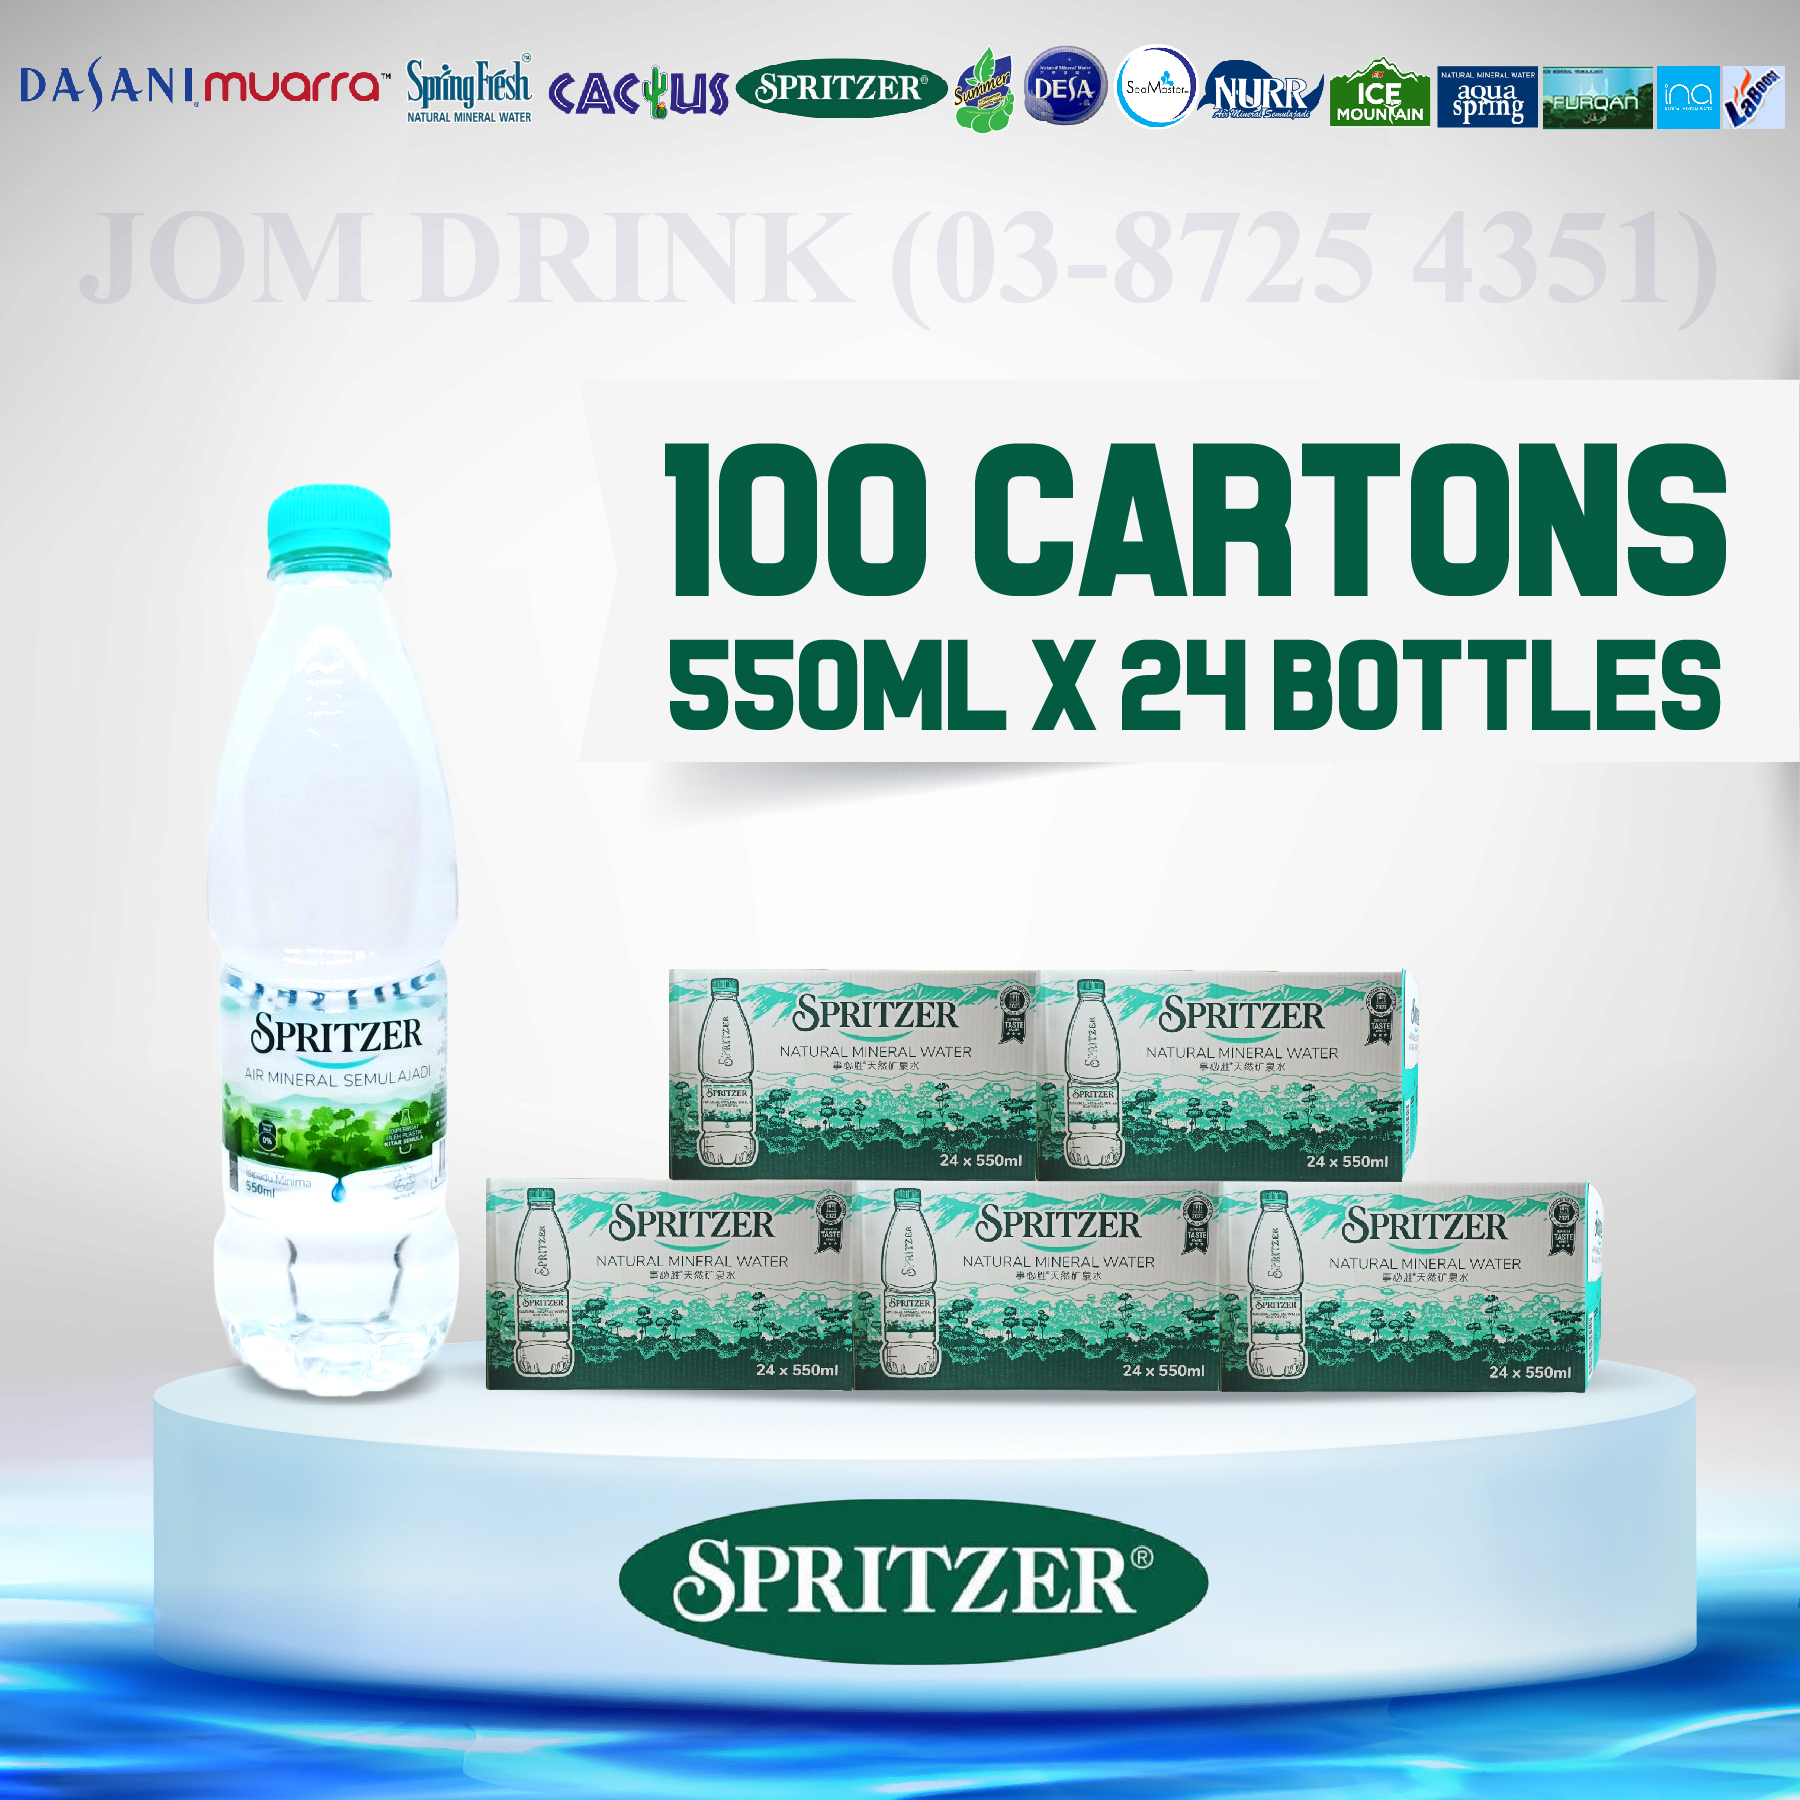 PACKAGES OF 100 BOXES : SPRITZER MINERAL WATER 550ML